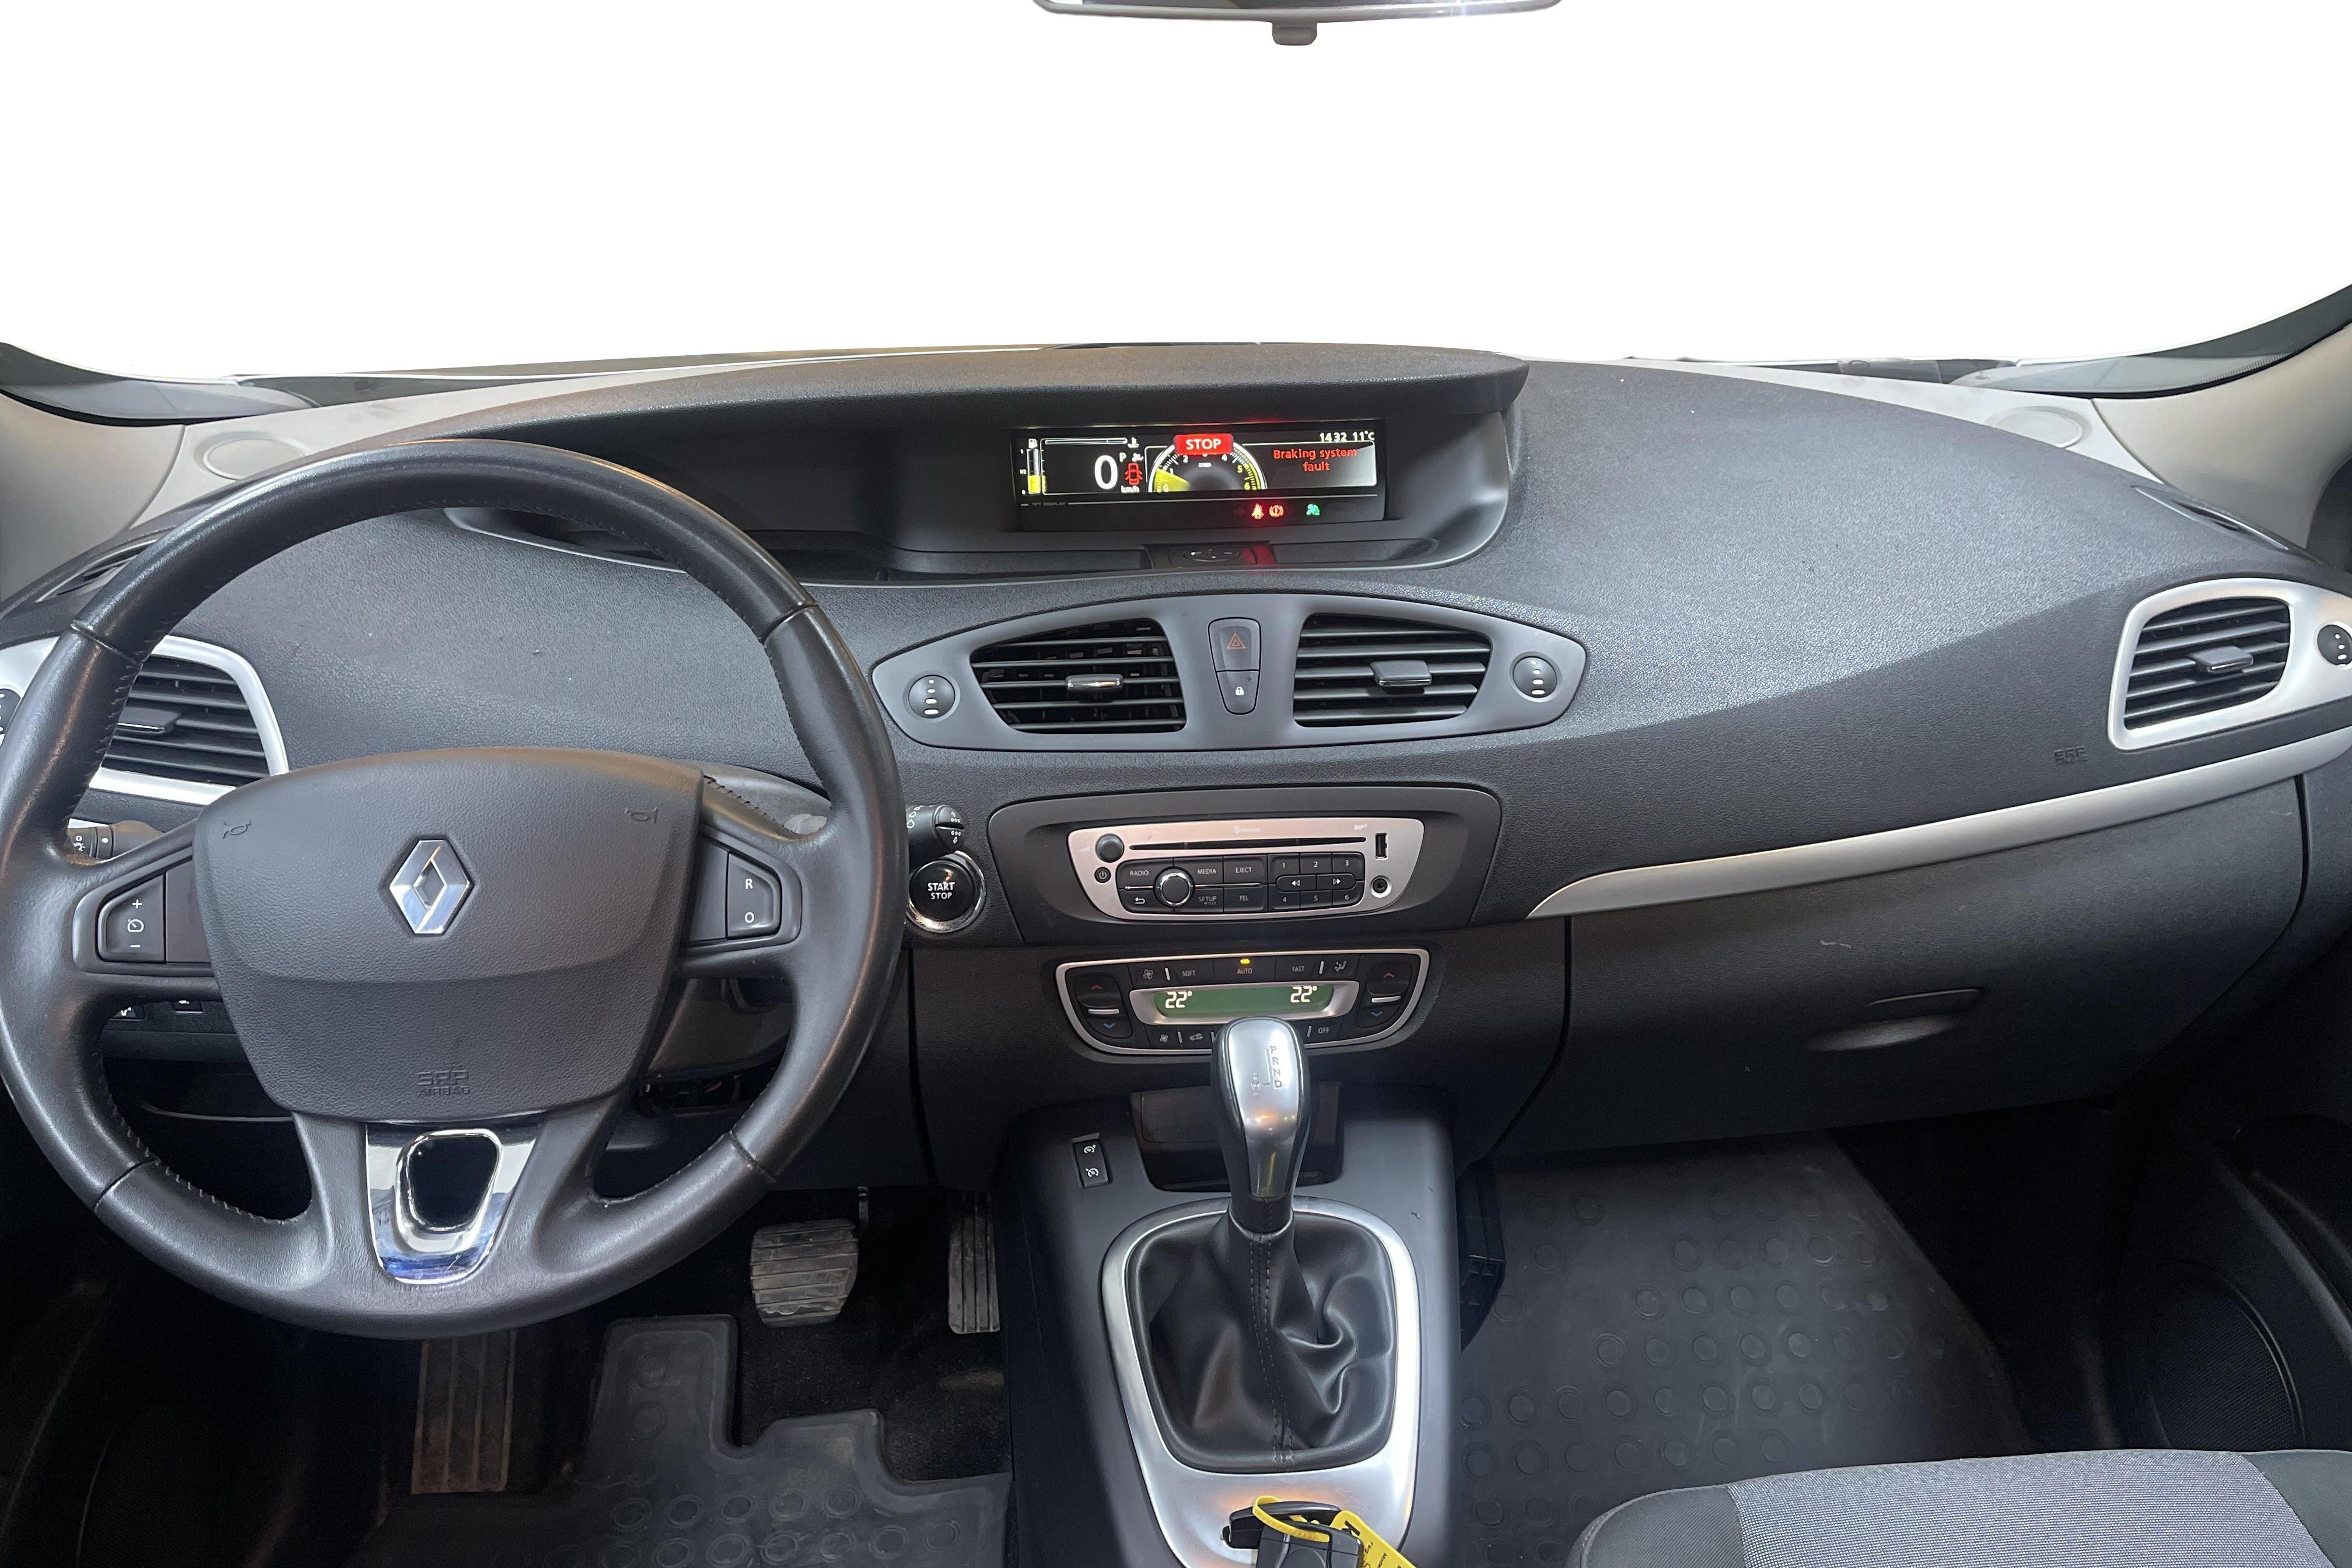 Renault Grand Scénic III 1.5 dCi FAP (110hk) - 92 800 km - Automatic - silver - 2015